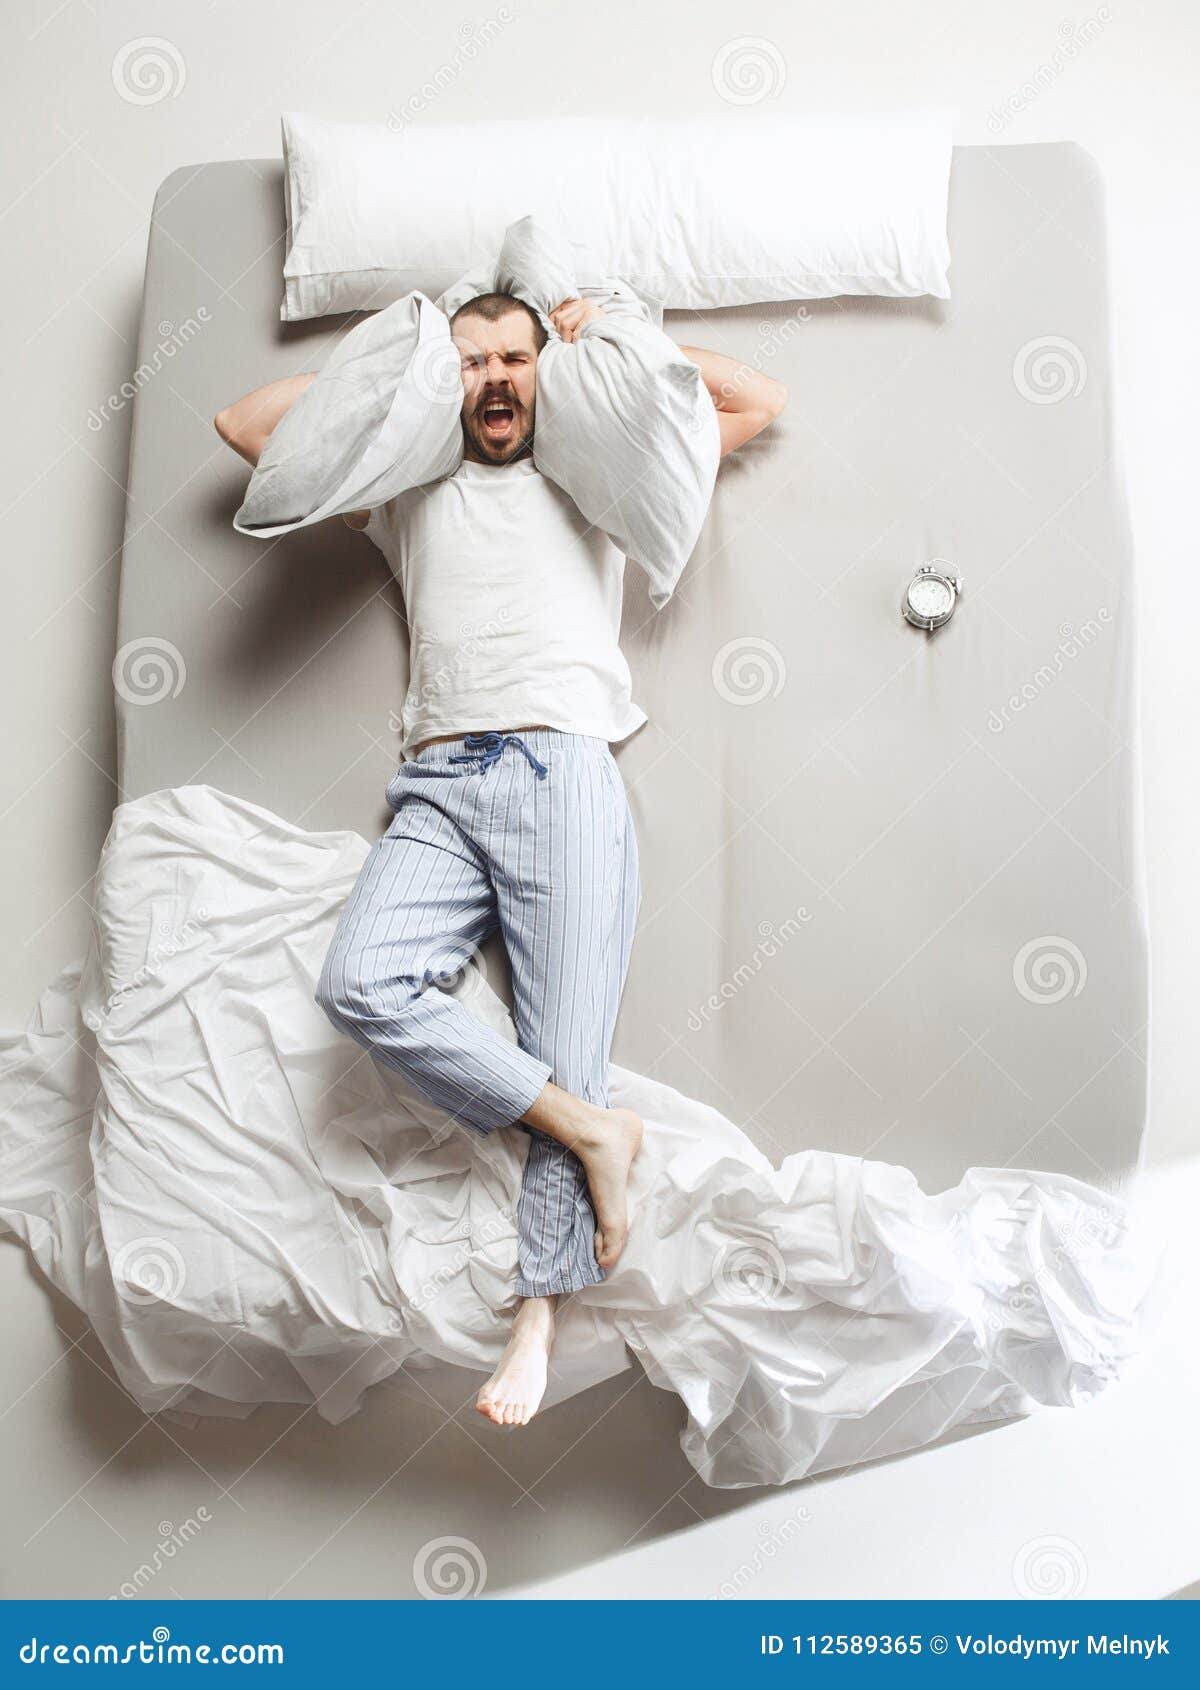 Top View Photo of Young Man Sleeping in a Big White Bed Stock Image ...